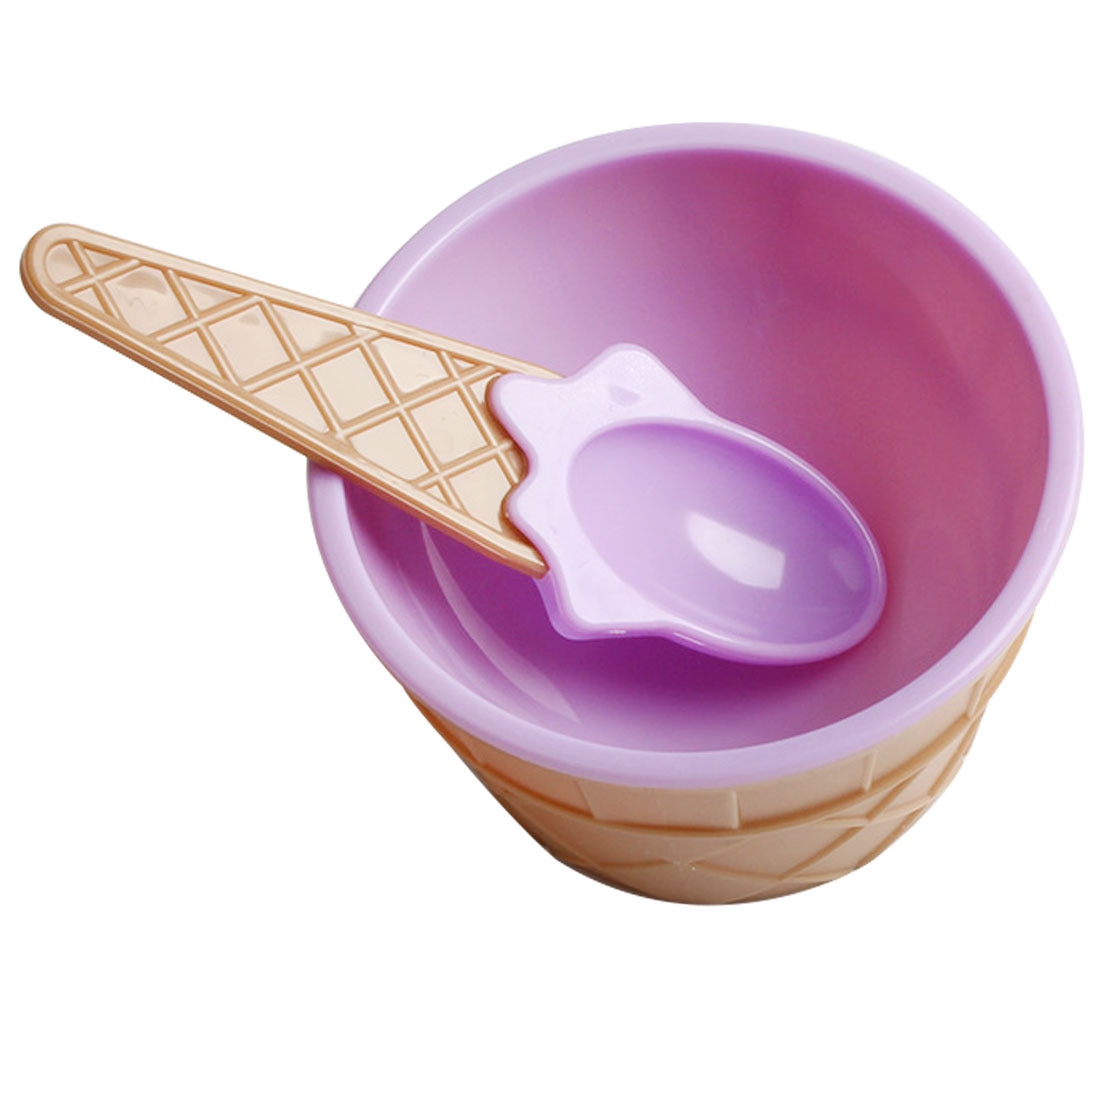 1Pc-7-Colors-Reusable-lovely-Ice-Cream-Bowl-With-a-Spoon-Wonderful-Gift-Children-Kids-Dessert-Ice-Cream-Bowls-Ice-Cream-Cup-2251832771996757